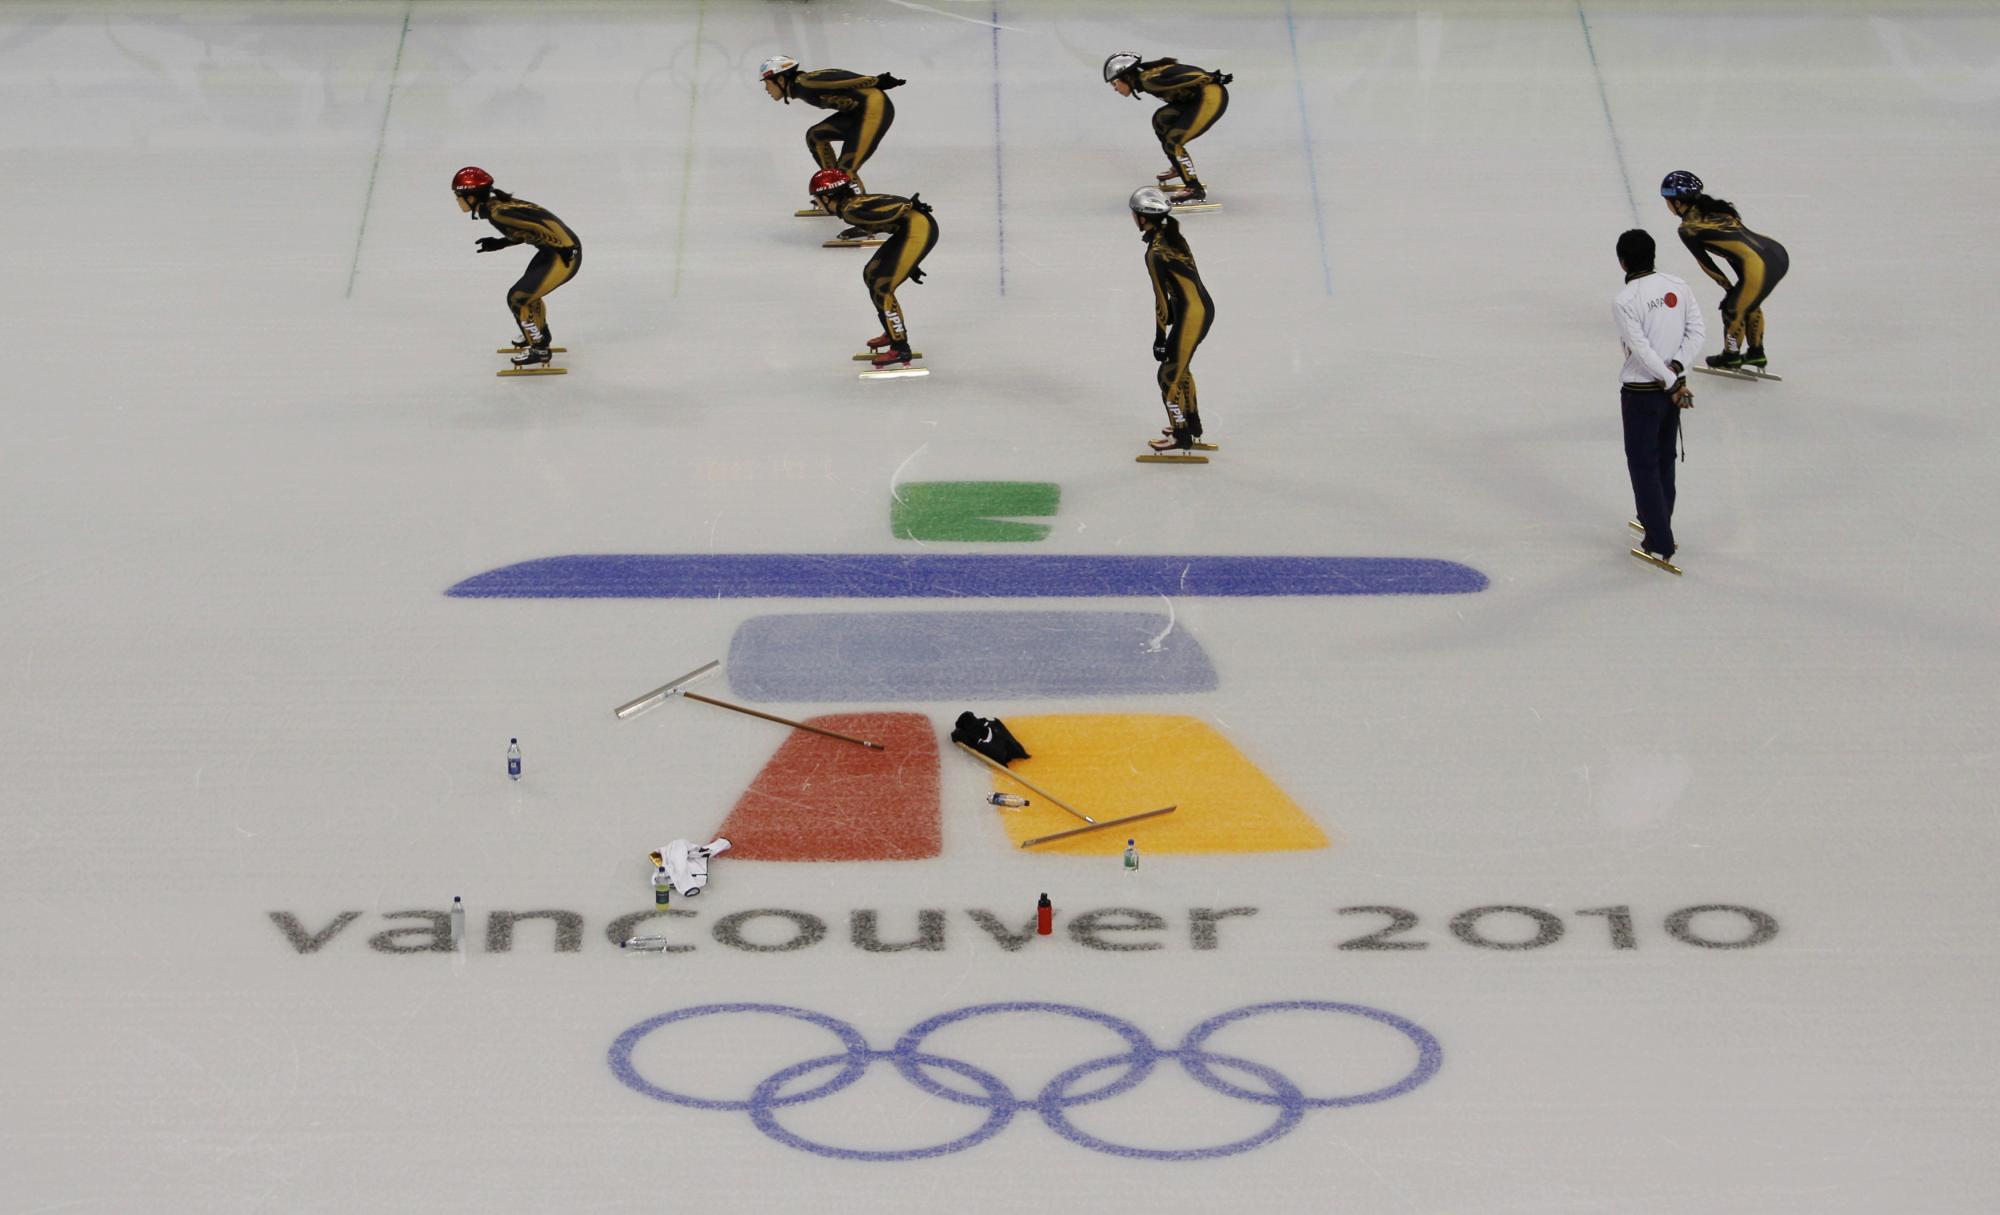 Vancouver revs up for Winter Games